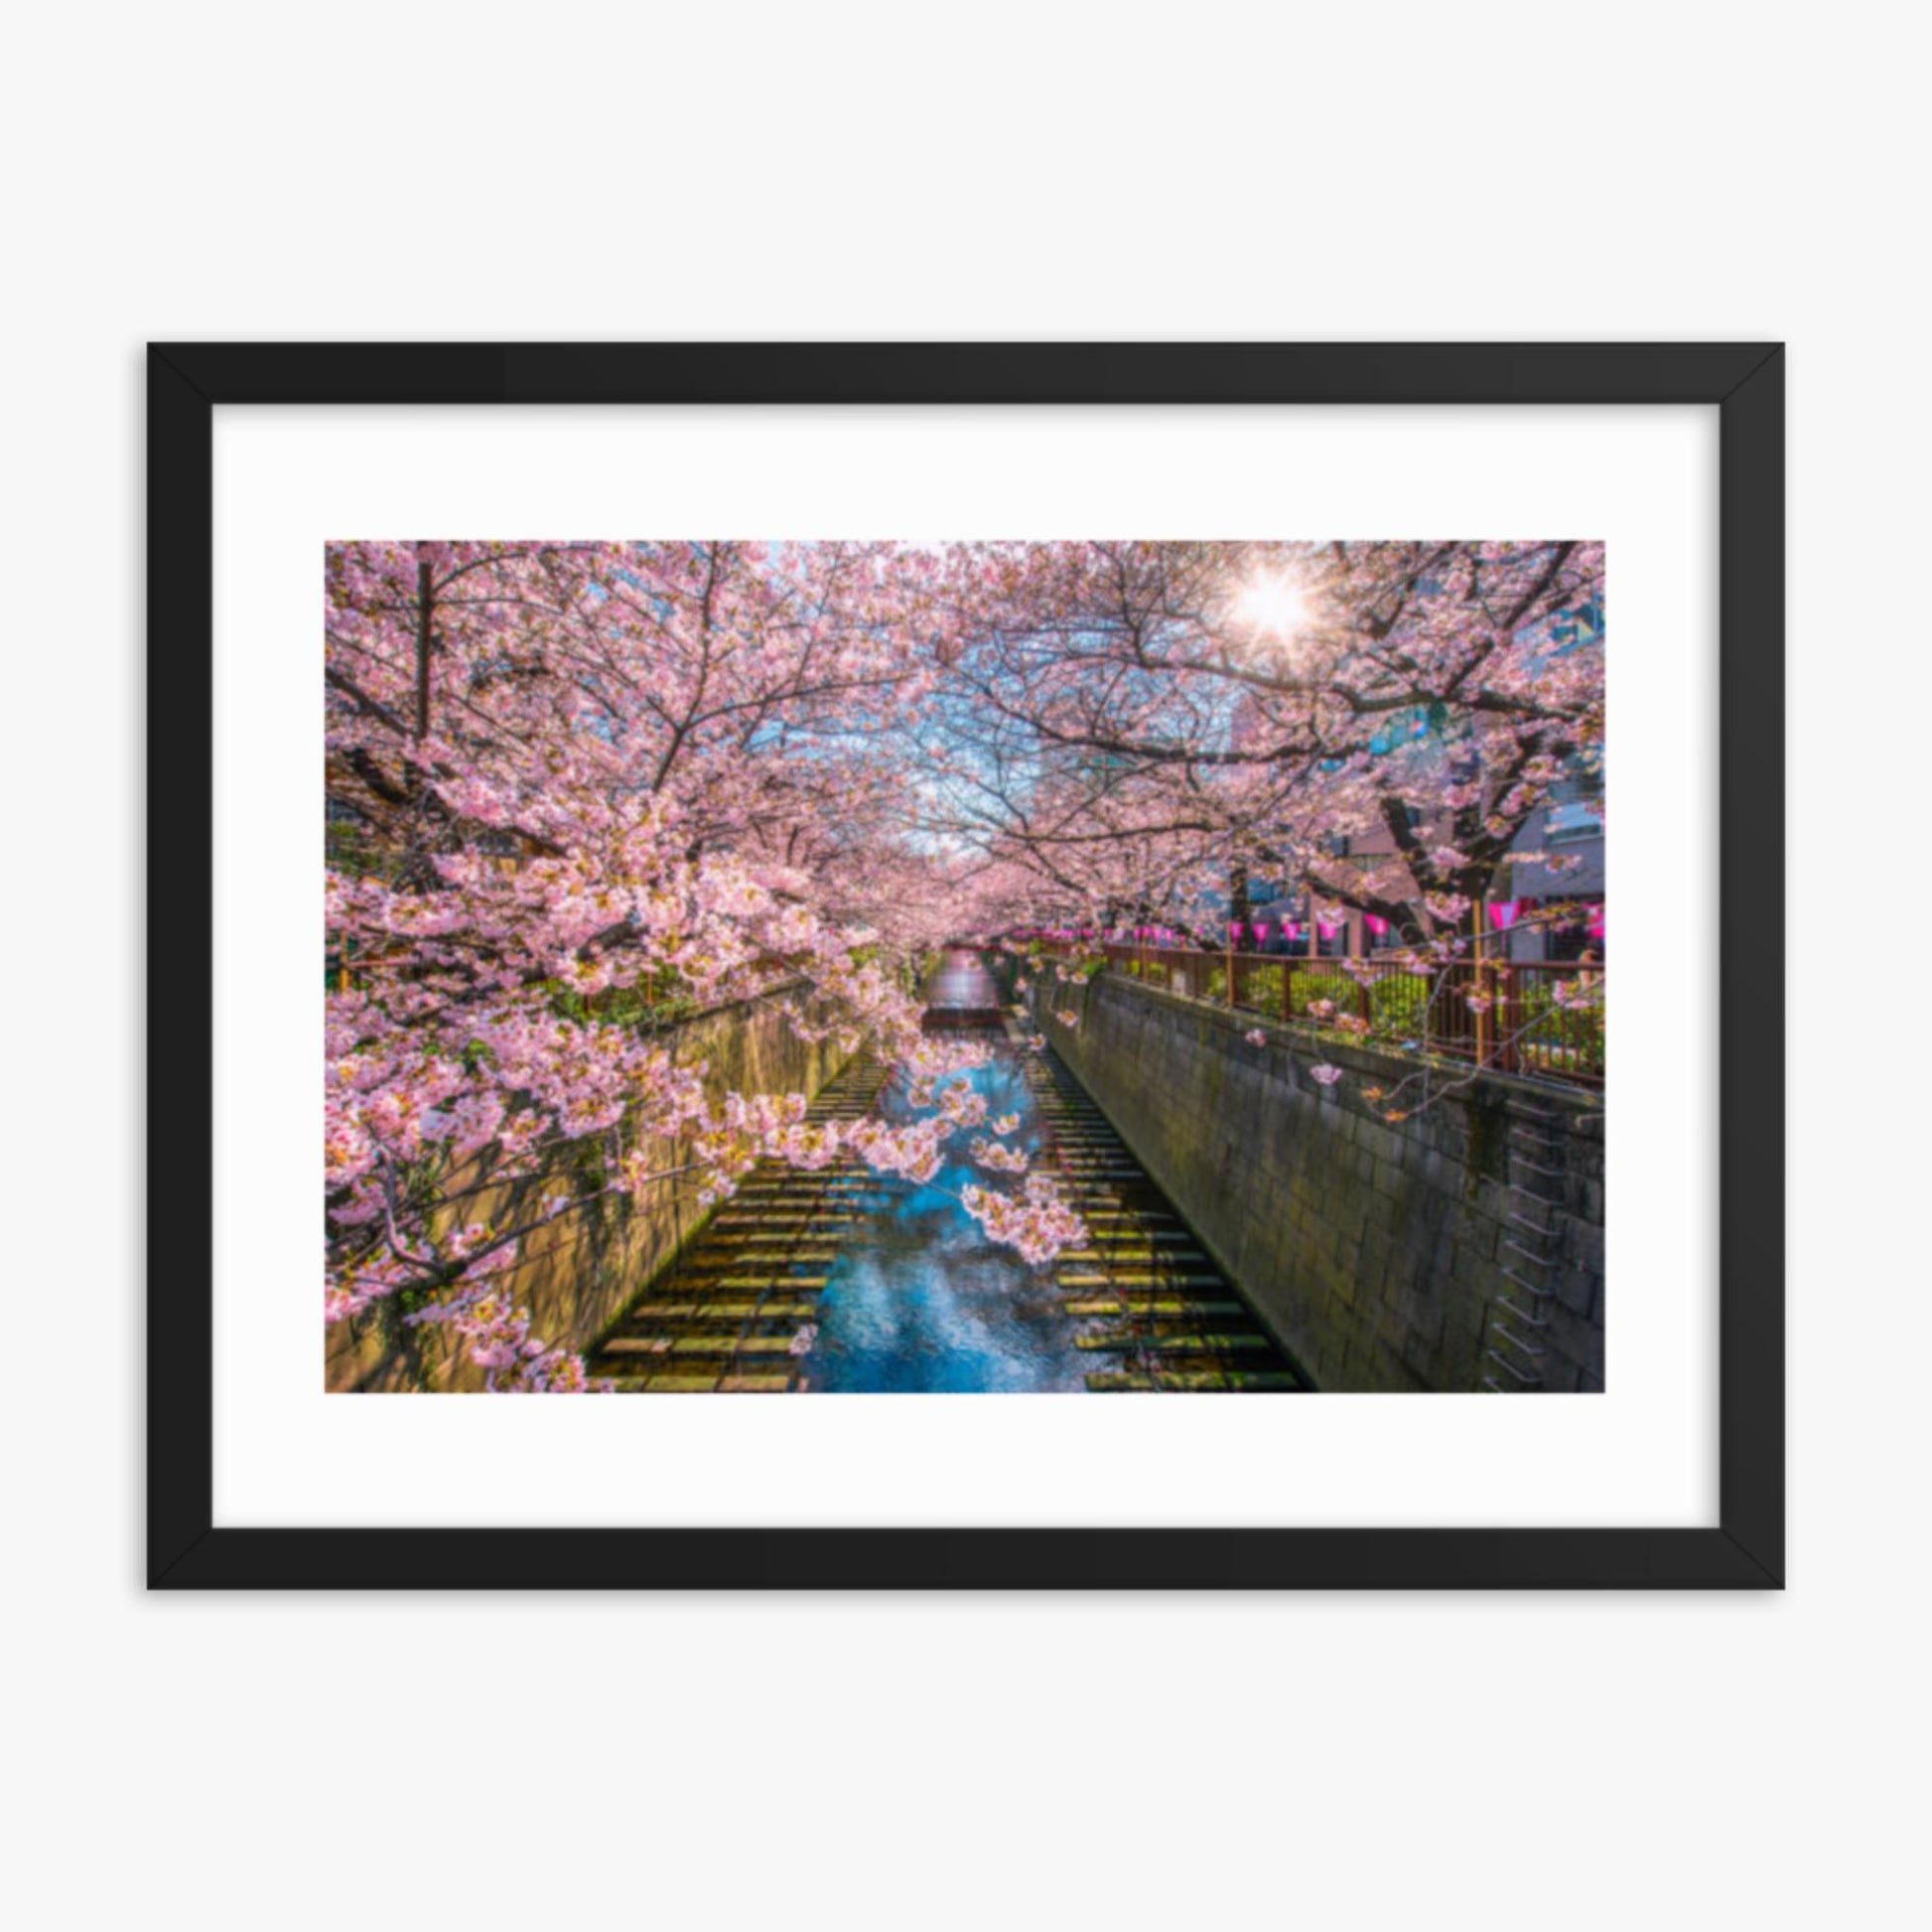 Cherry blossom sakura lined Meguro Canal in Tokyo 18x24 in Poster With Black Frame